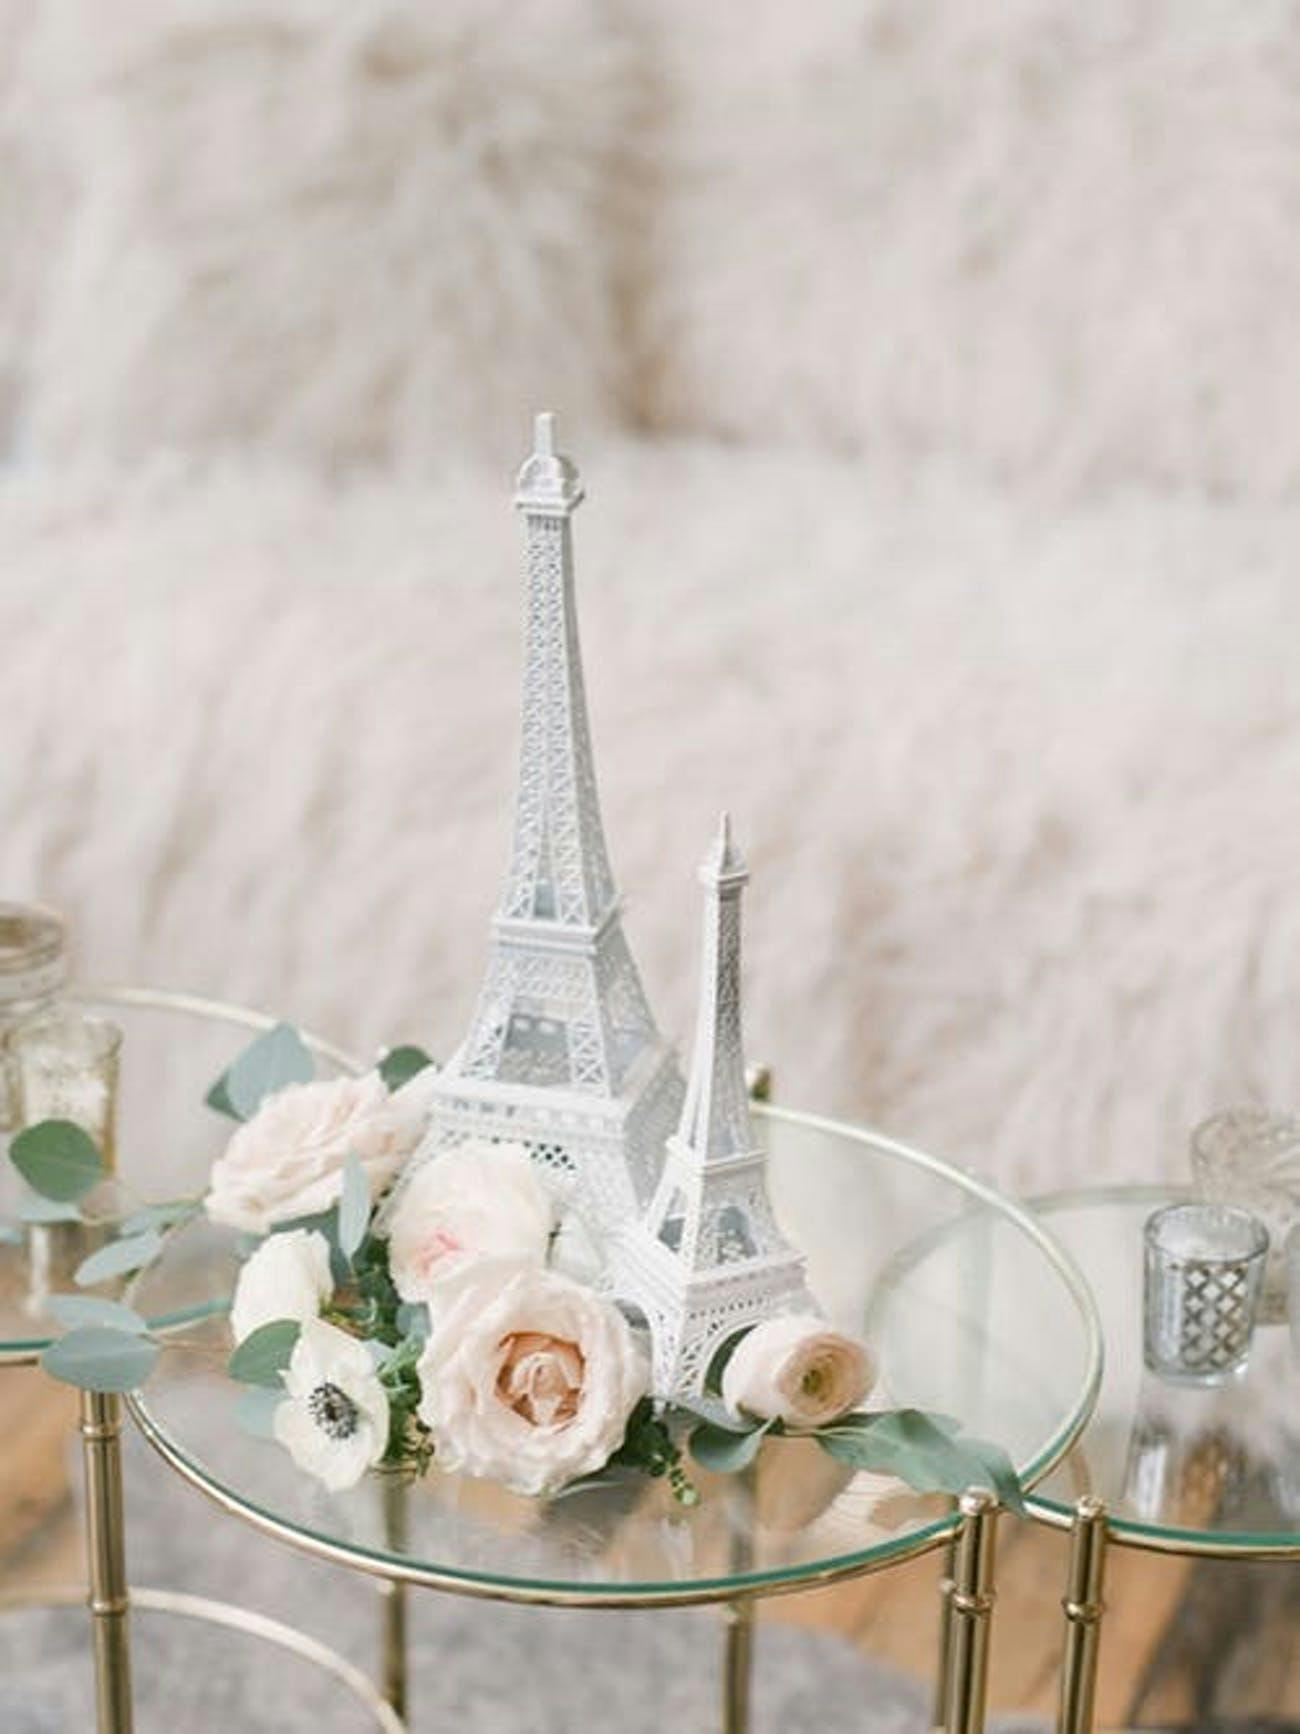 Tiny Clear Side Table with a Silver Eiffel Tower Surrounded with Flowers